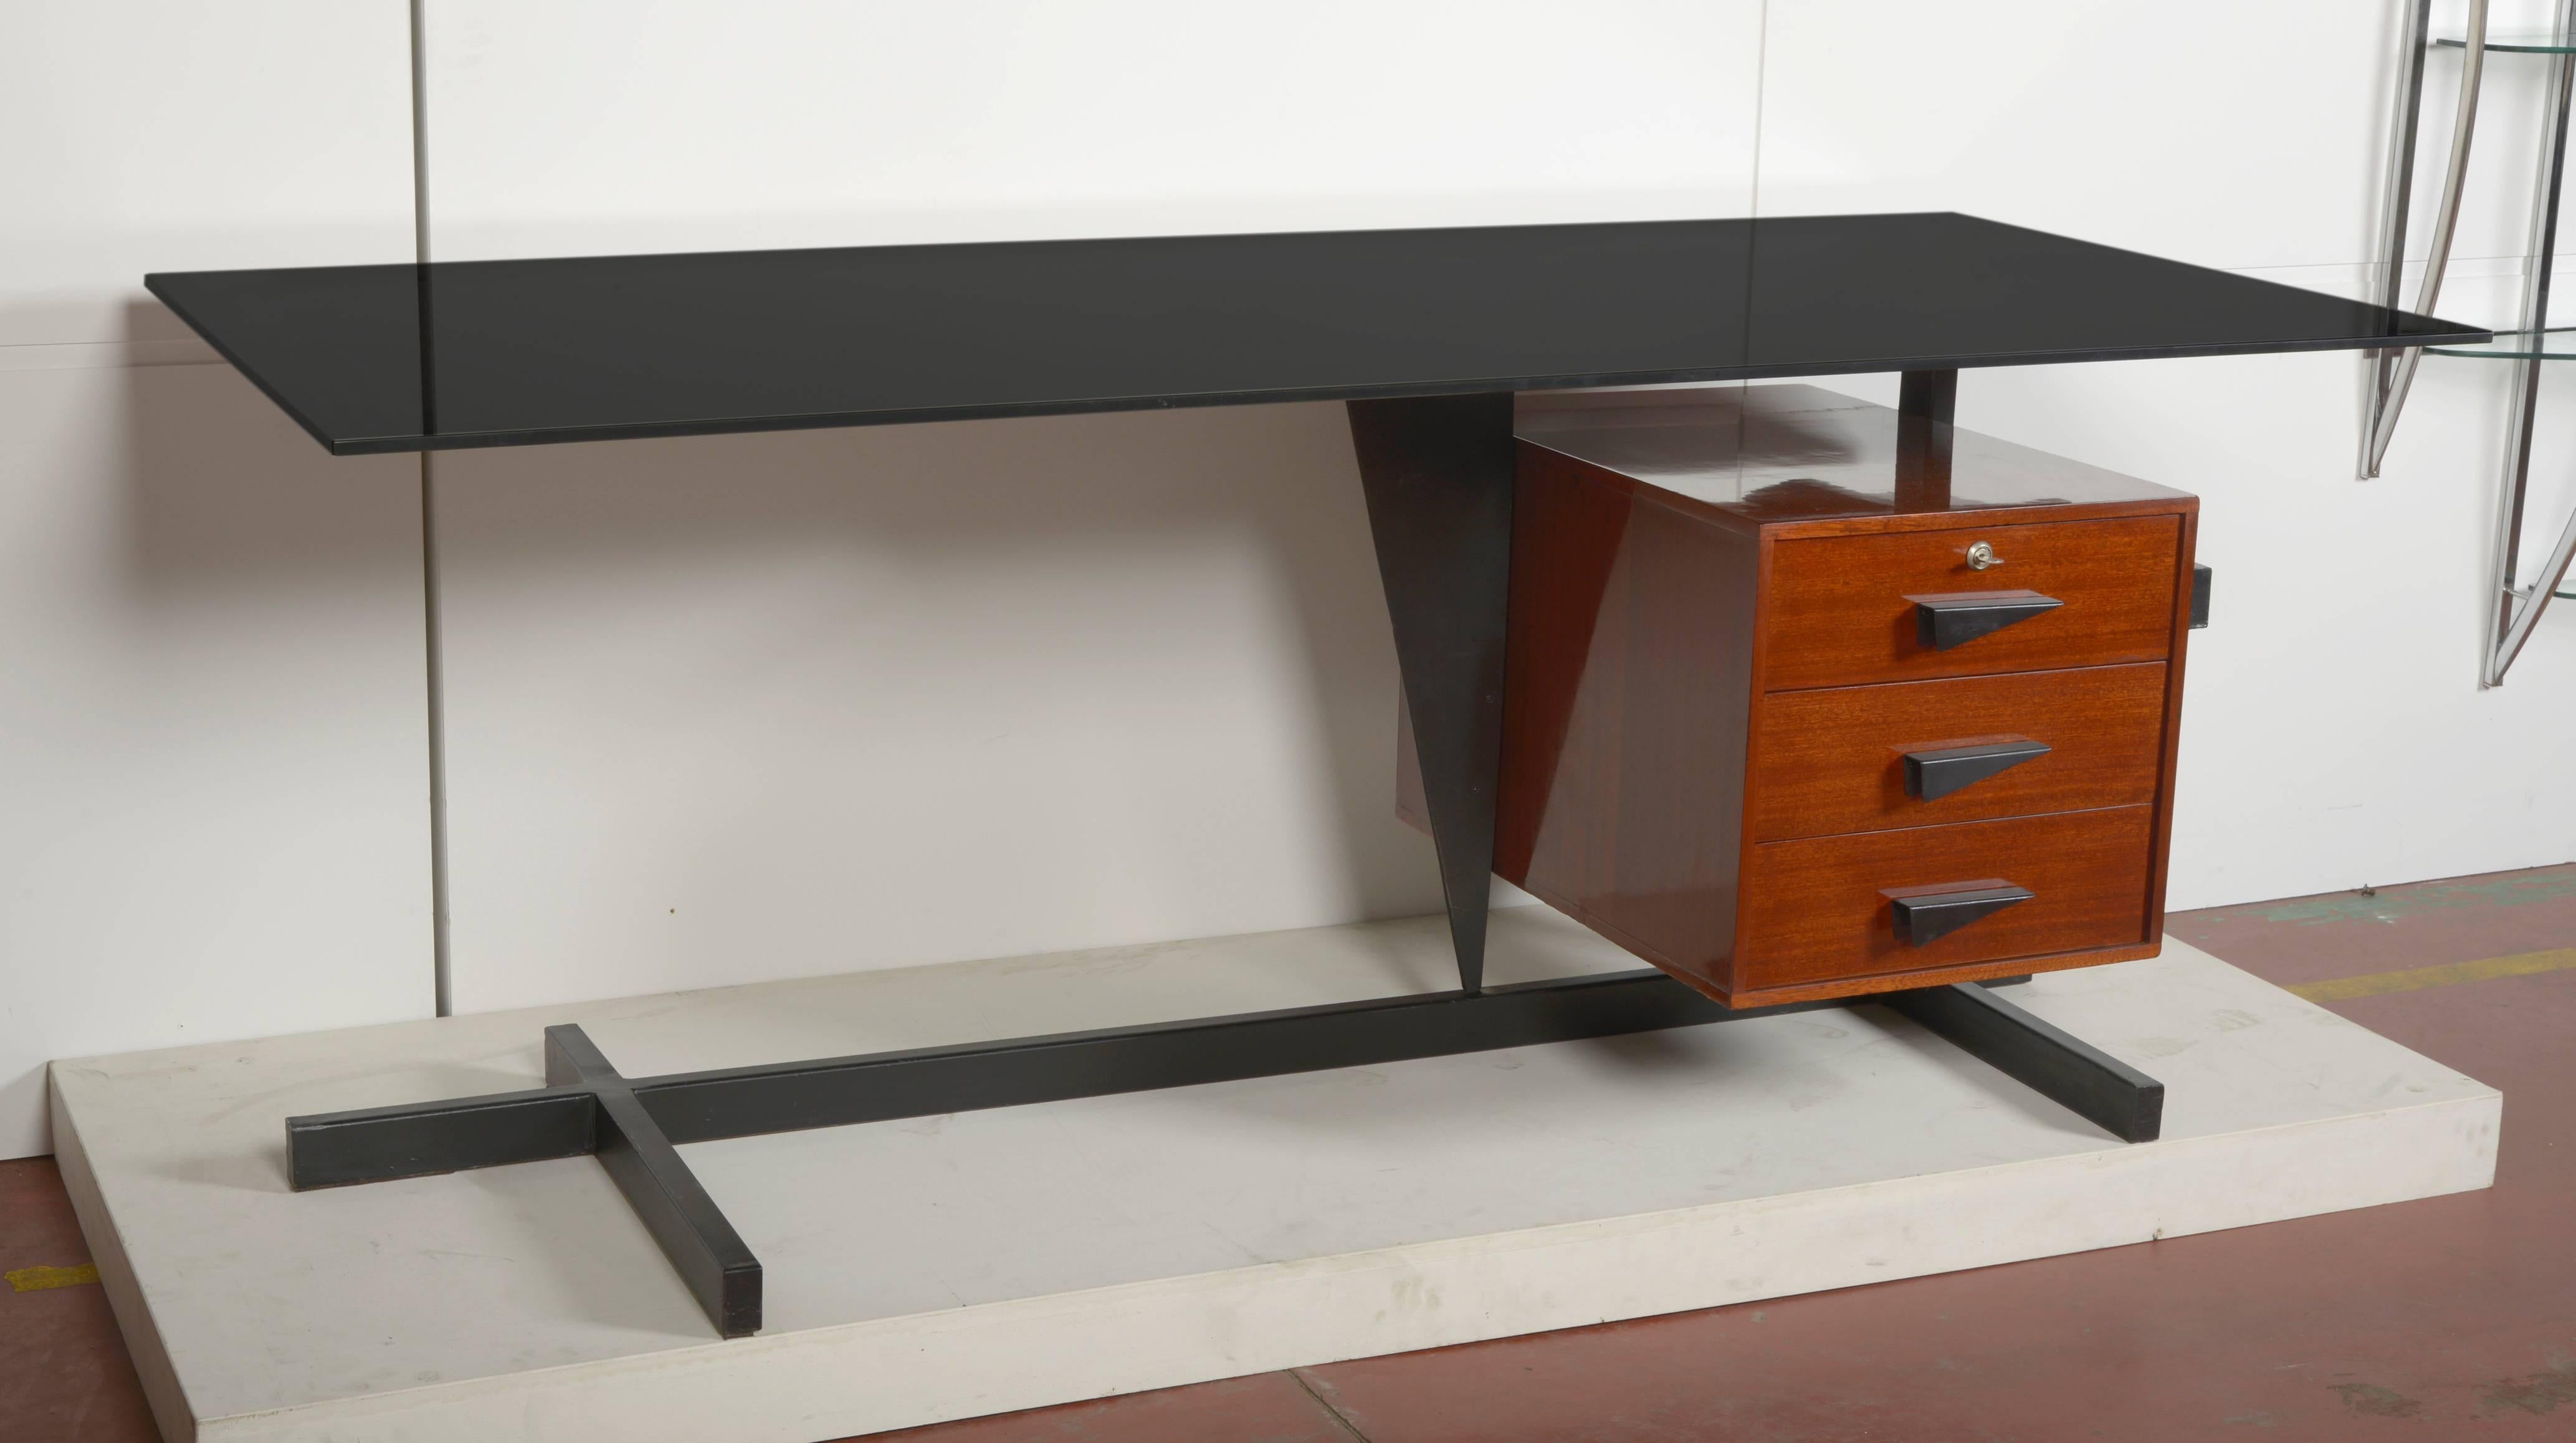 1960's mahogany and painted metal architect desk.
Black glass.